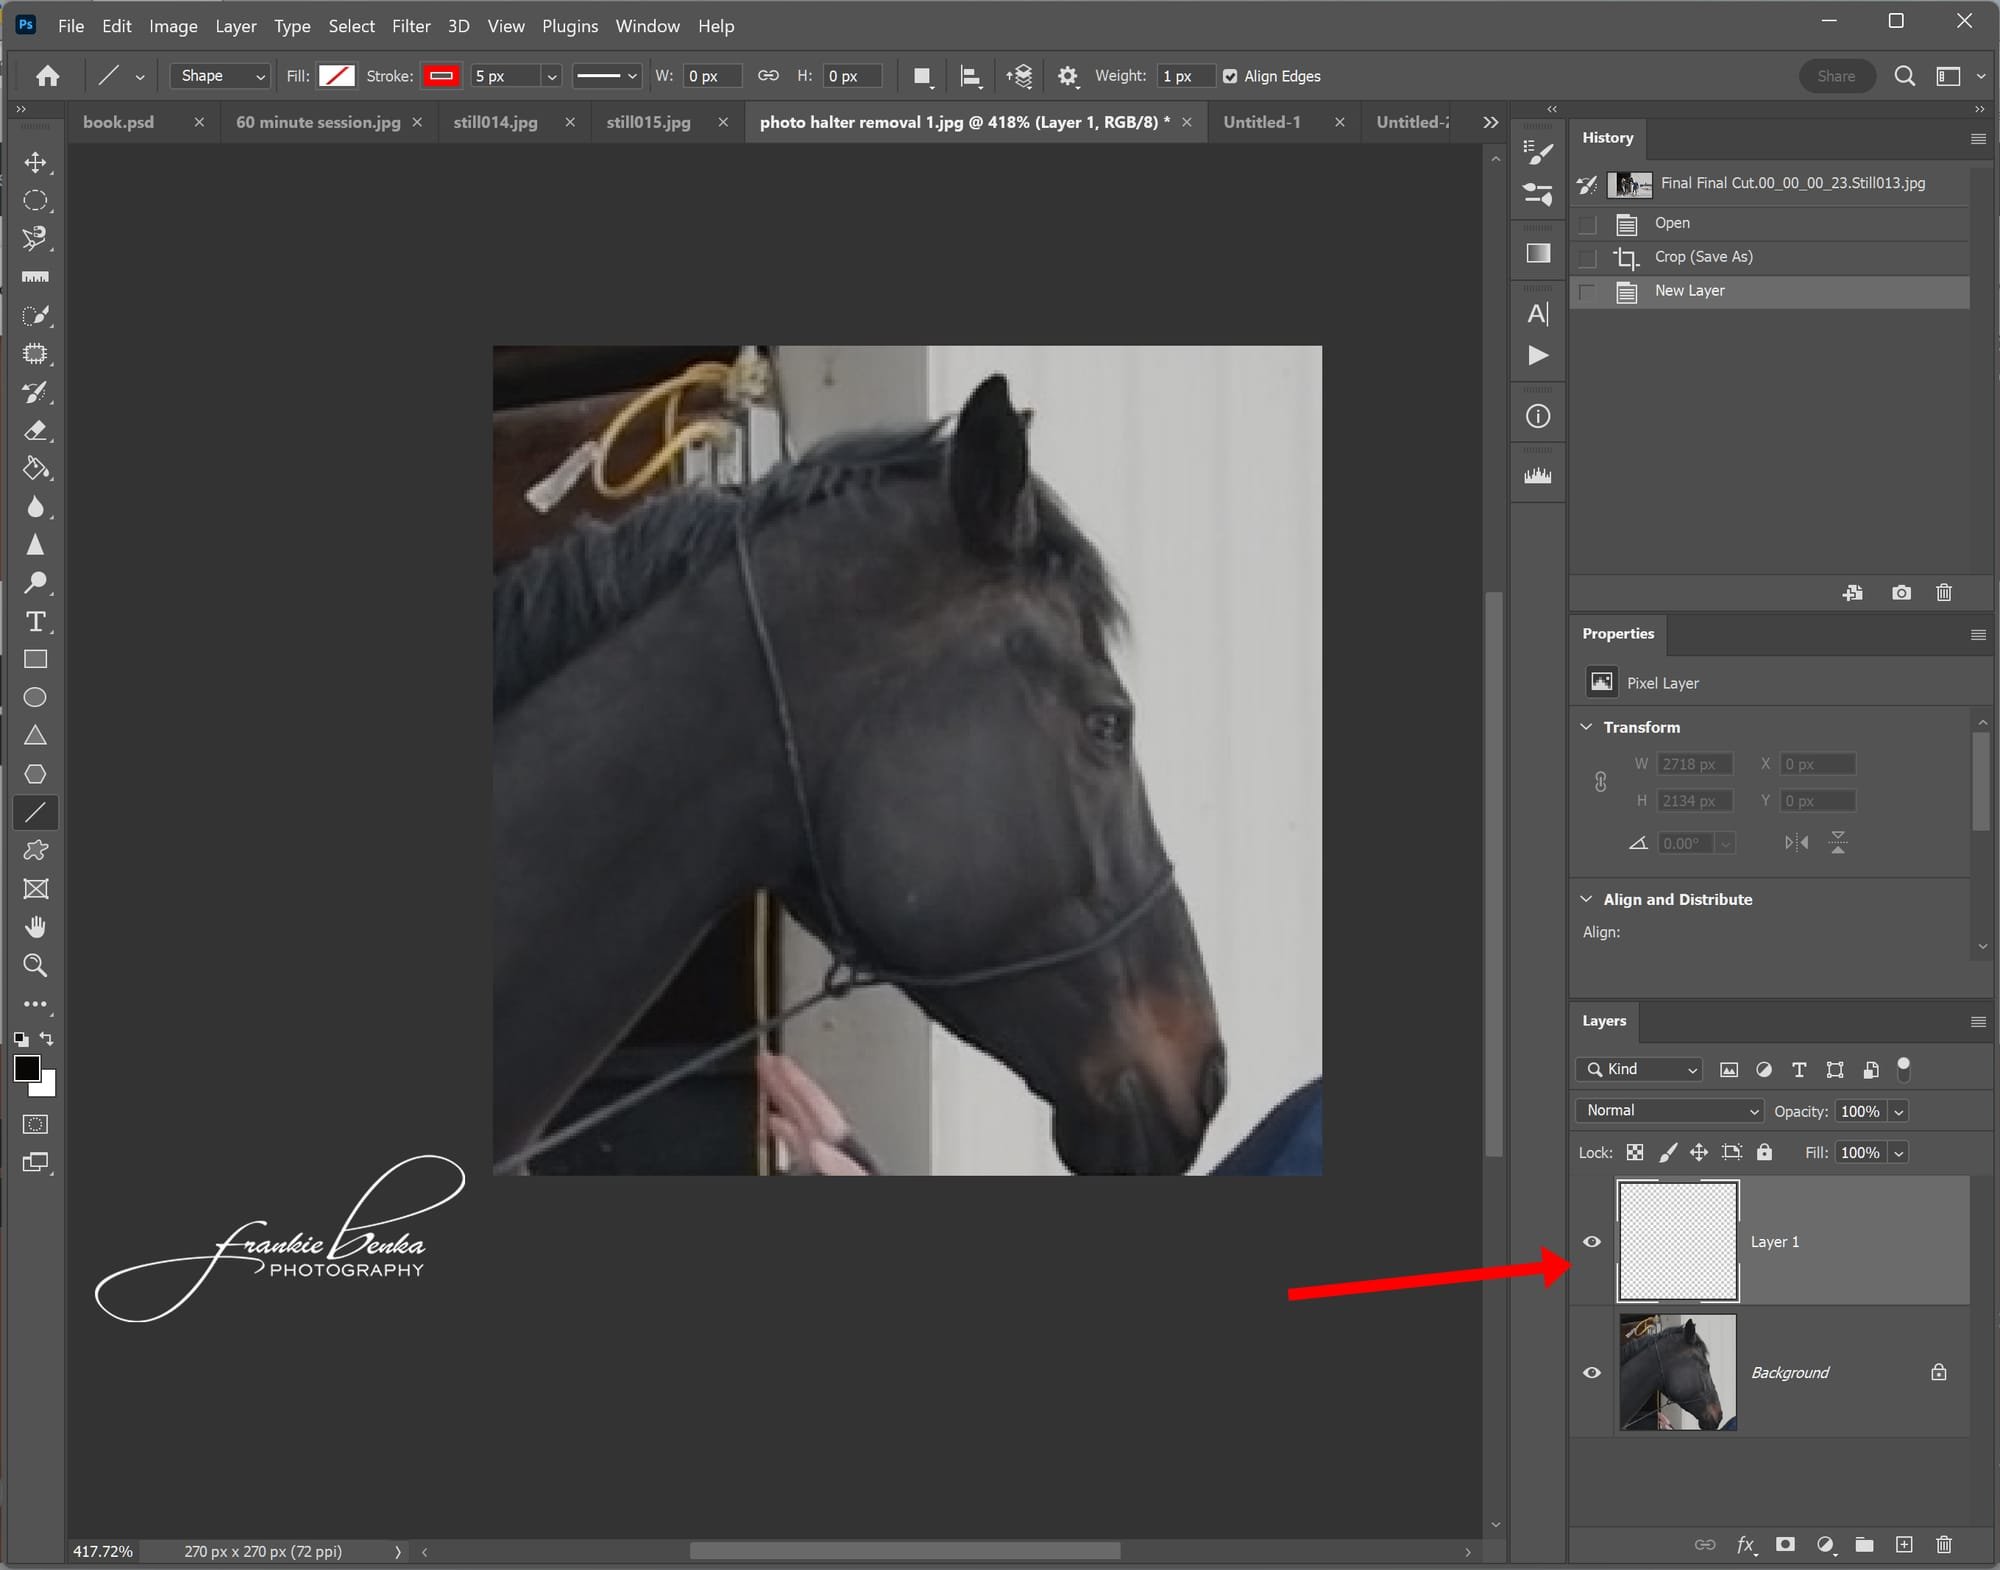 Removing photo halters in Photoshop